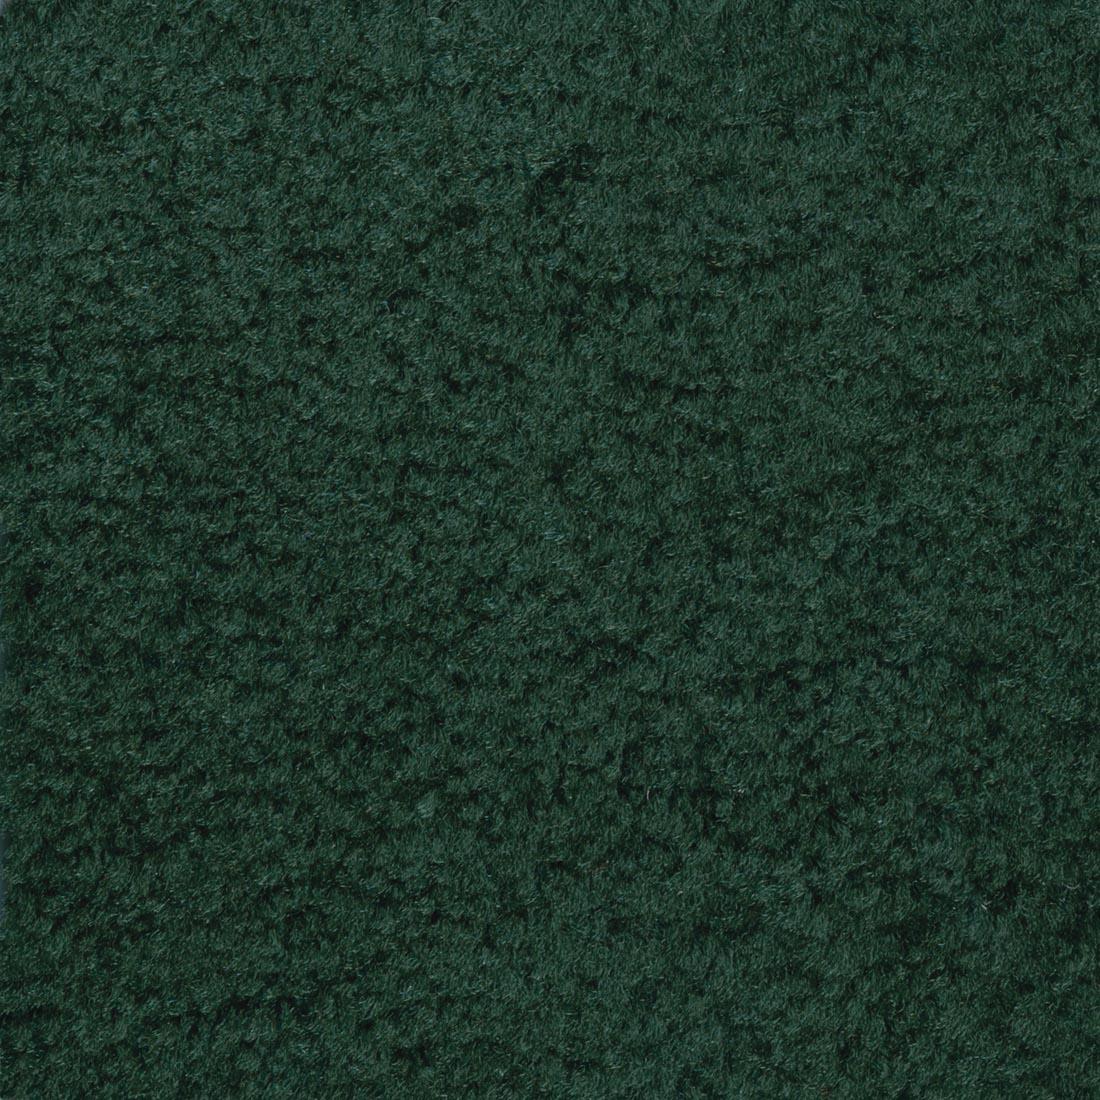 Emerald-colored carpet swatch from the Rectangle Rug by Carpets For Kids